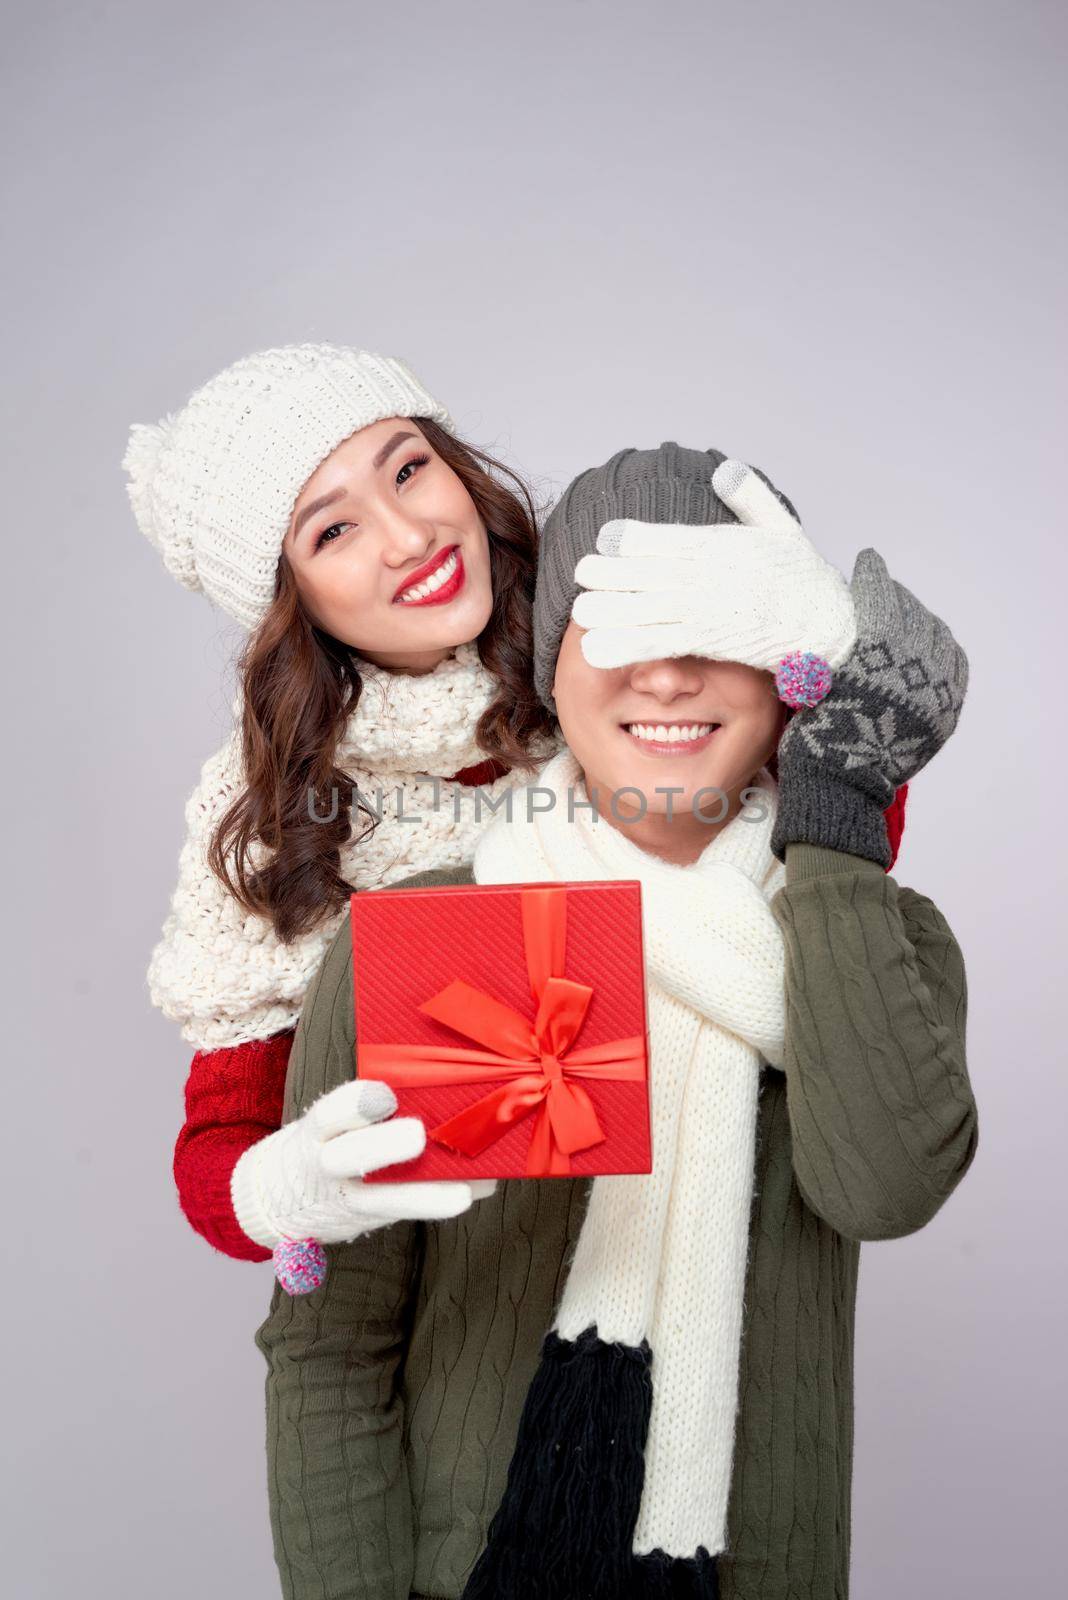 Couple gift. Young woman giving gift to boyfriend on white background by makidotvn